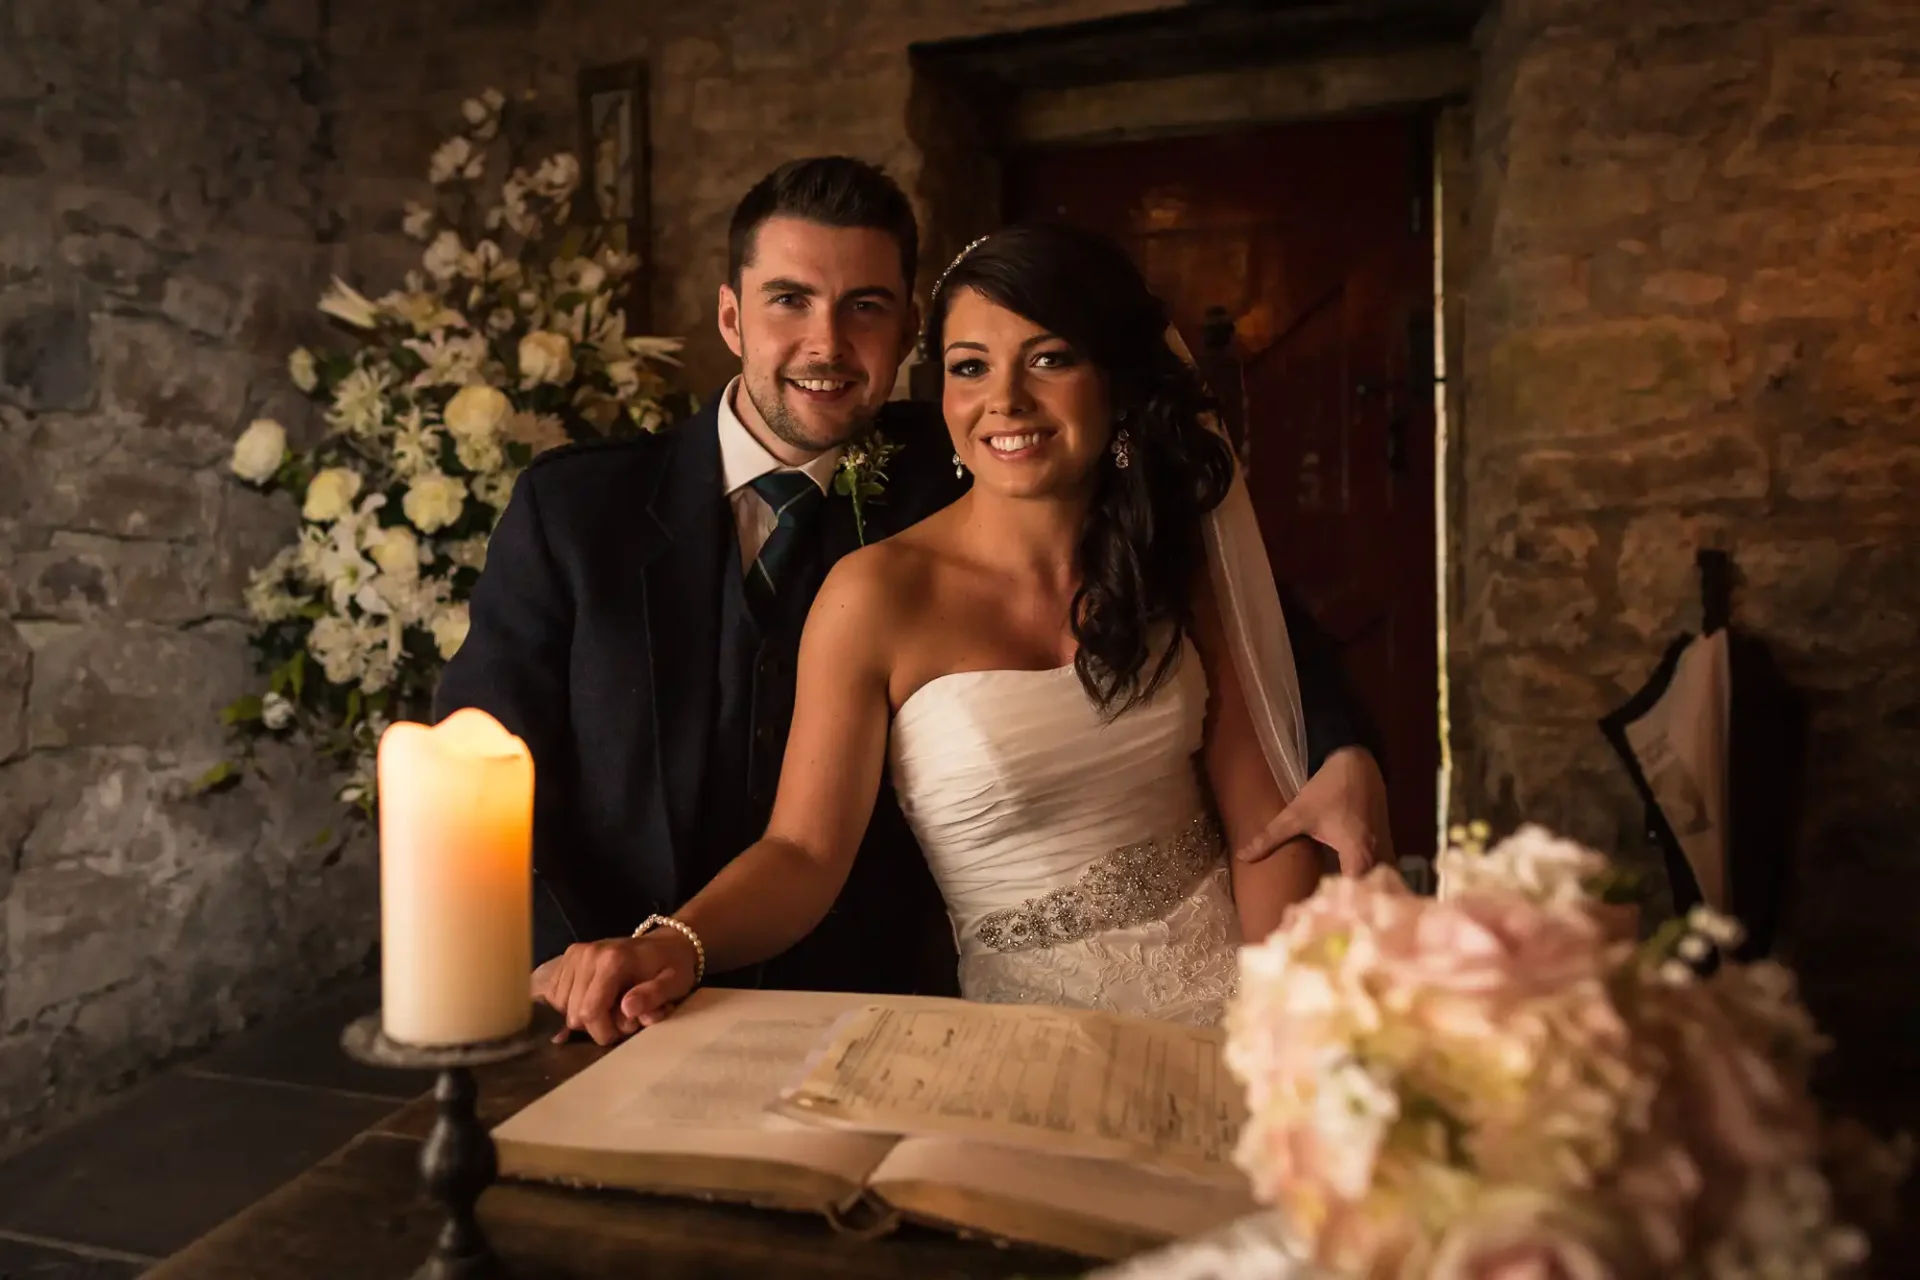 A newlywed couple signing a marriage register in a candlelit room, surrounded by flowers.